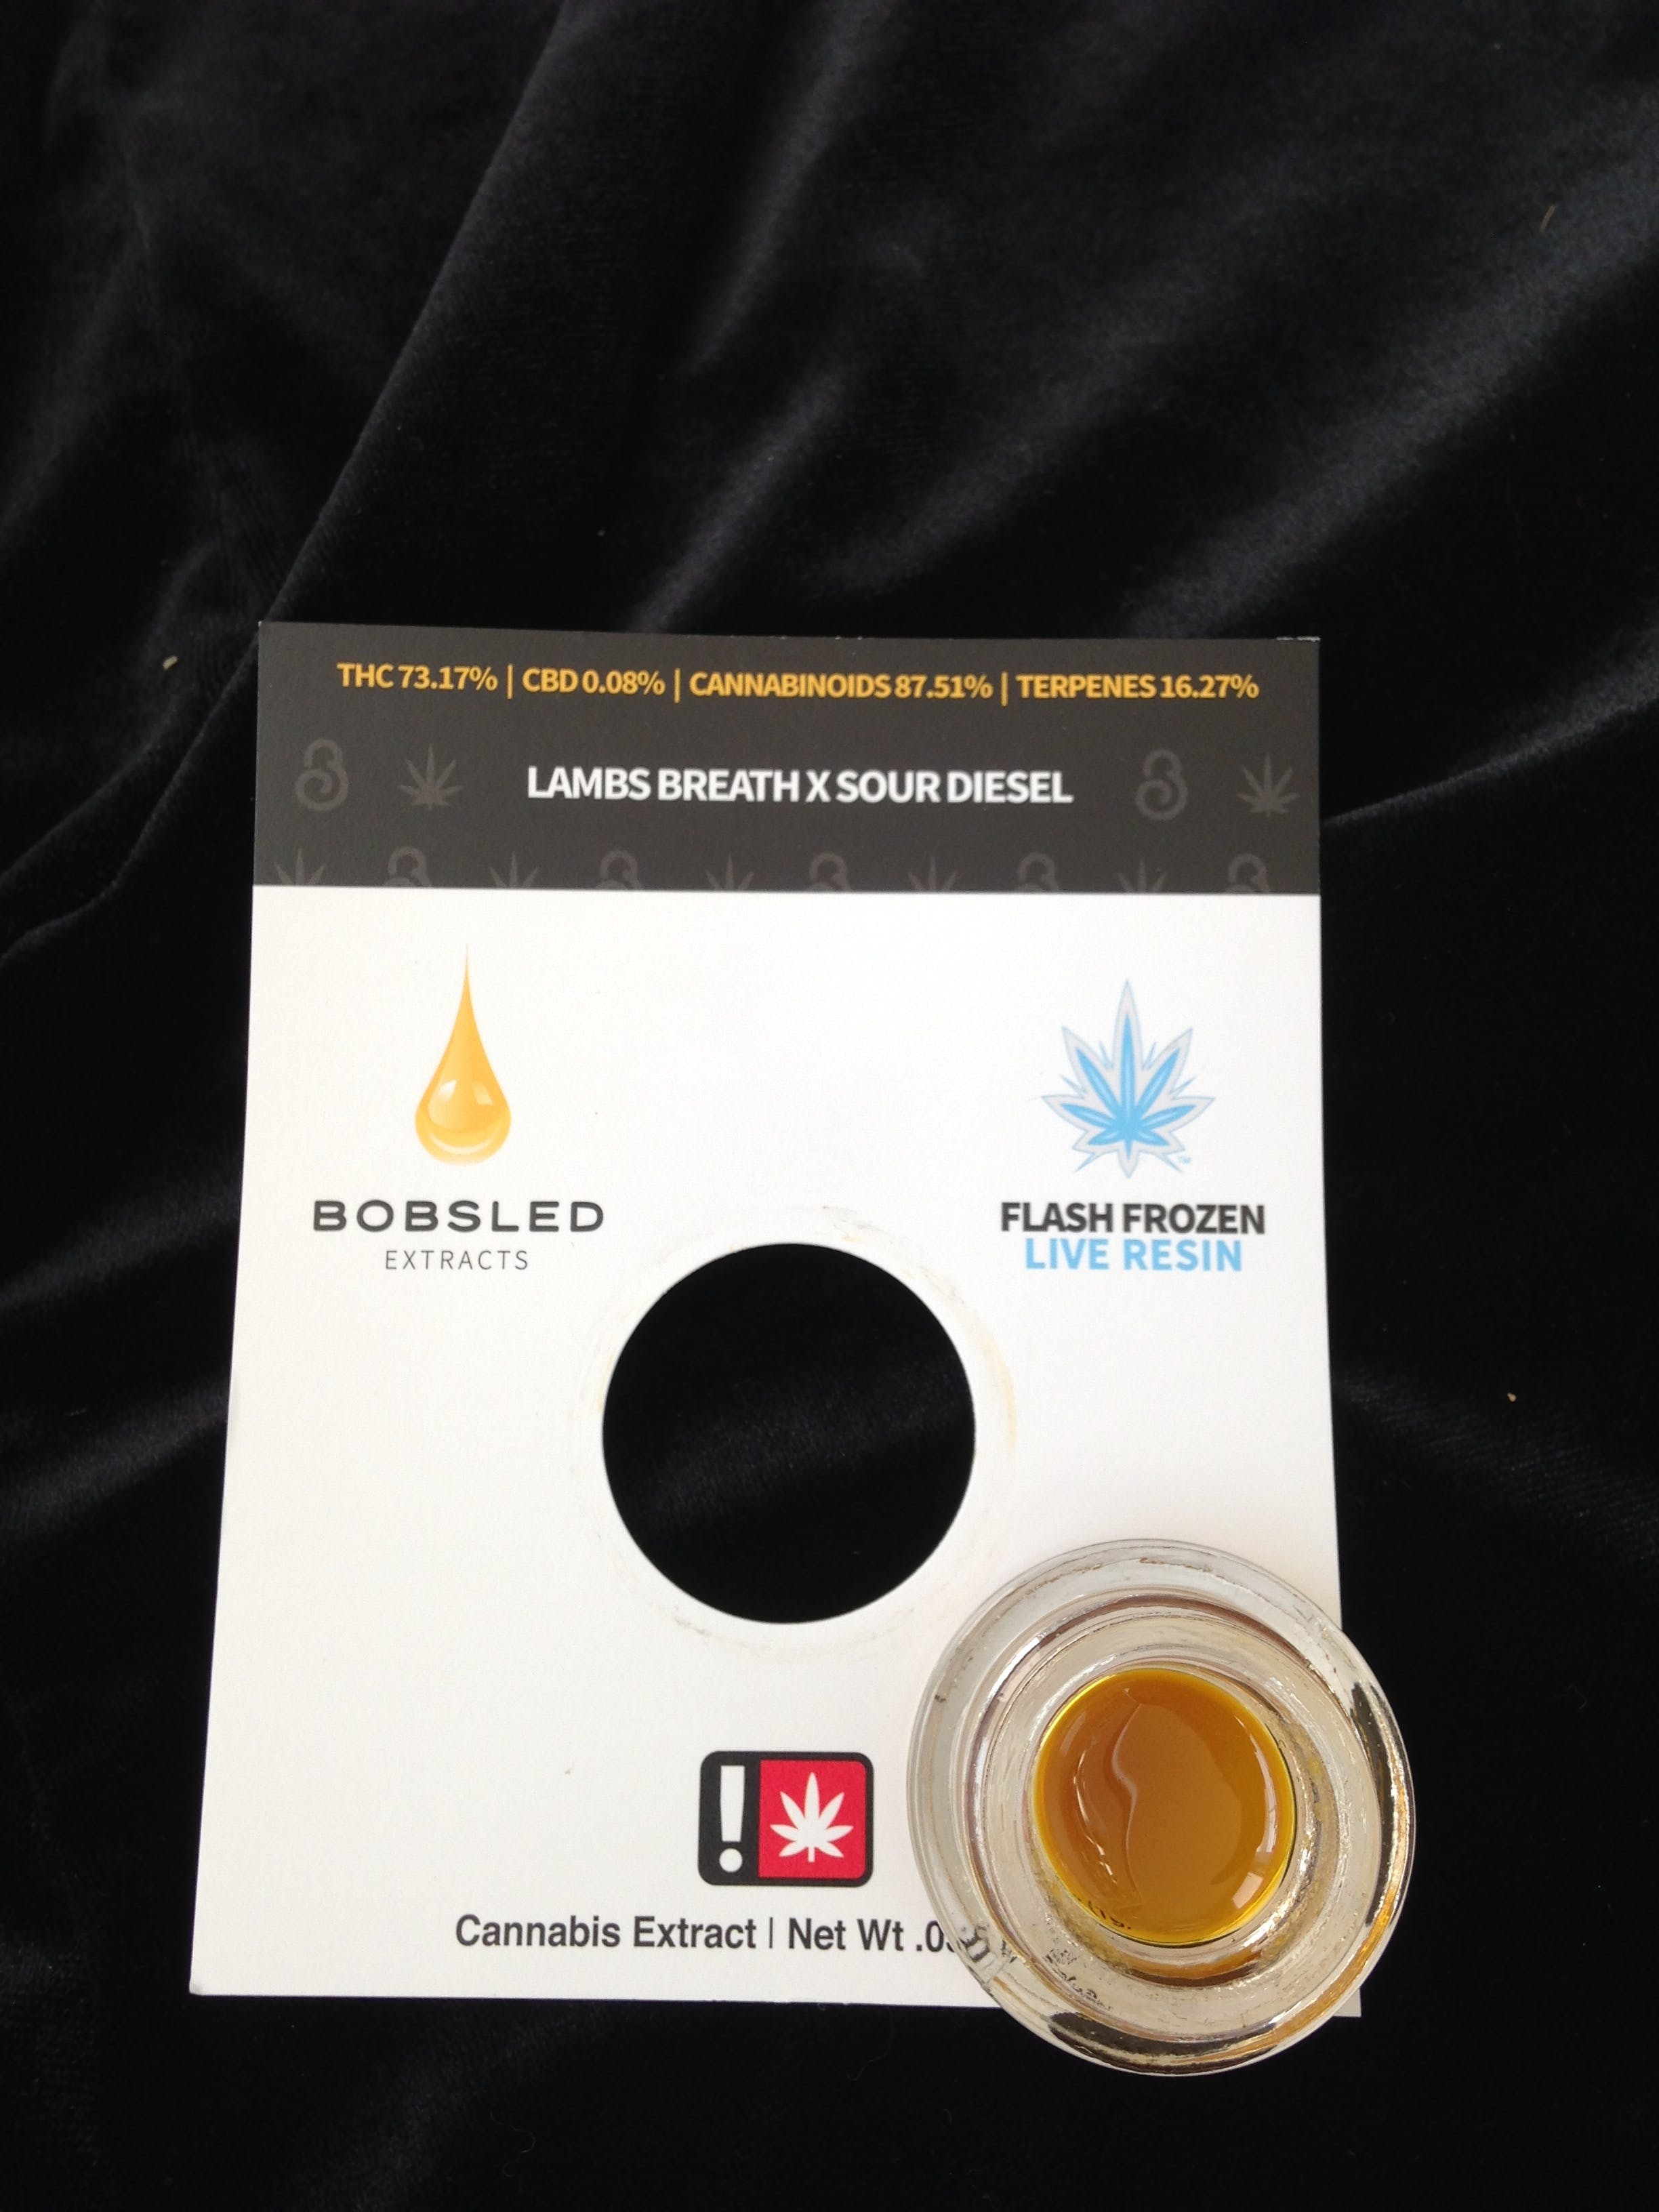 wax-bobsled-lambs-breath-x-sour-diesel-live-resin-1g